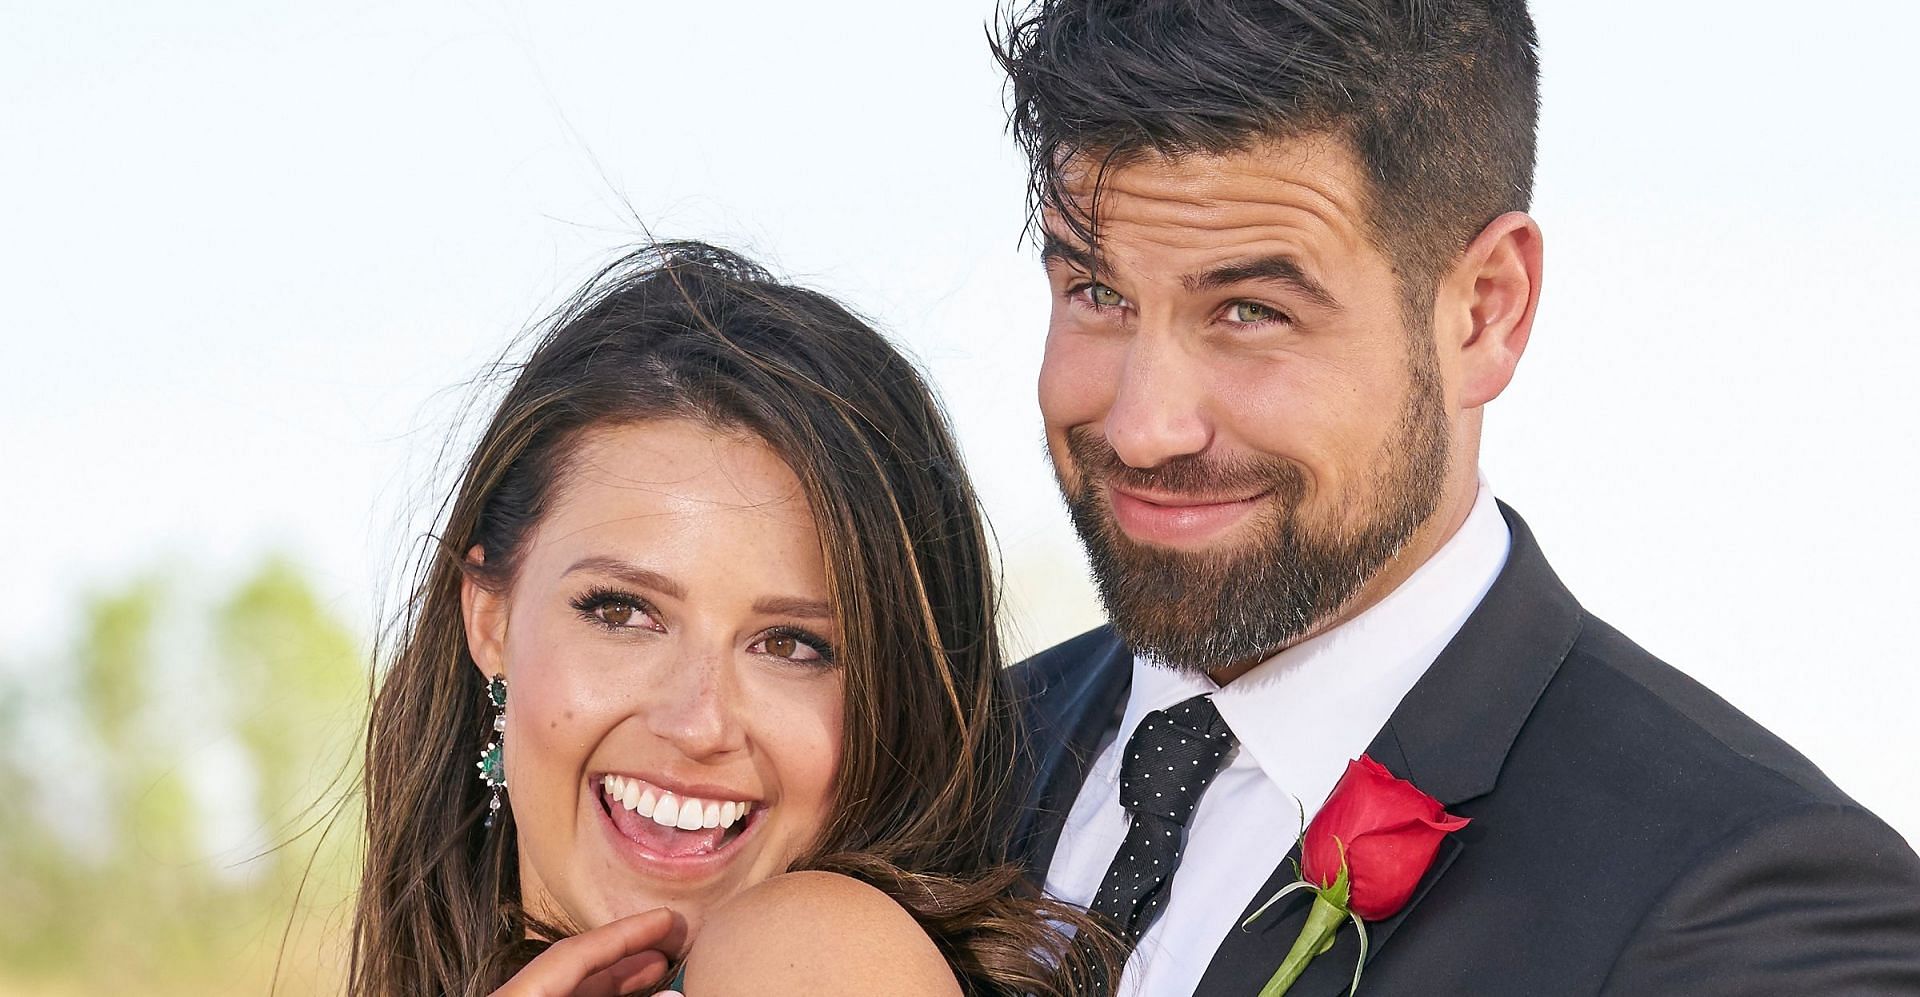 The internet is not surprised about Katie Thurston and Blake Moynes split (Image via Twitter/Bachelor Nation)